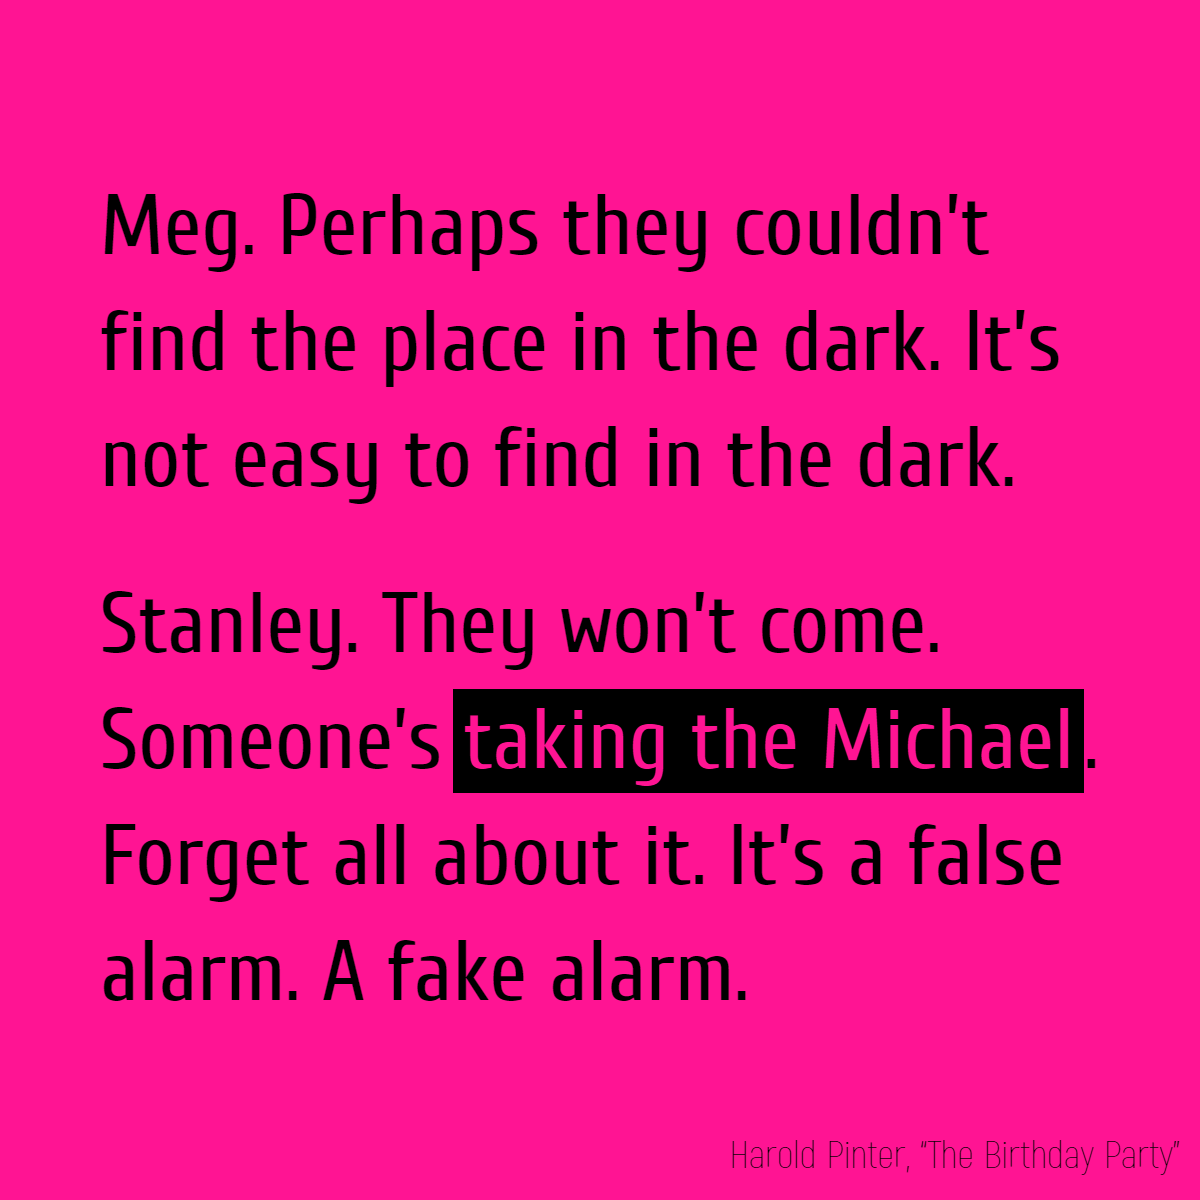 MEG. Perhaps they couldn’t find the place in the dark. It’s not easy to find in the dark. STANLEY. They won’t come. Someone’s taking the Michael. Forget all about it. It’s a false alarm. A fake alarm.